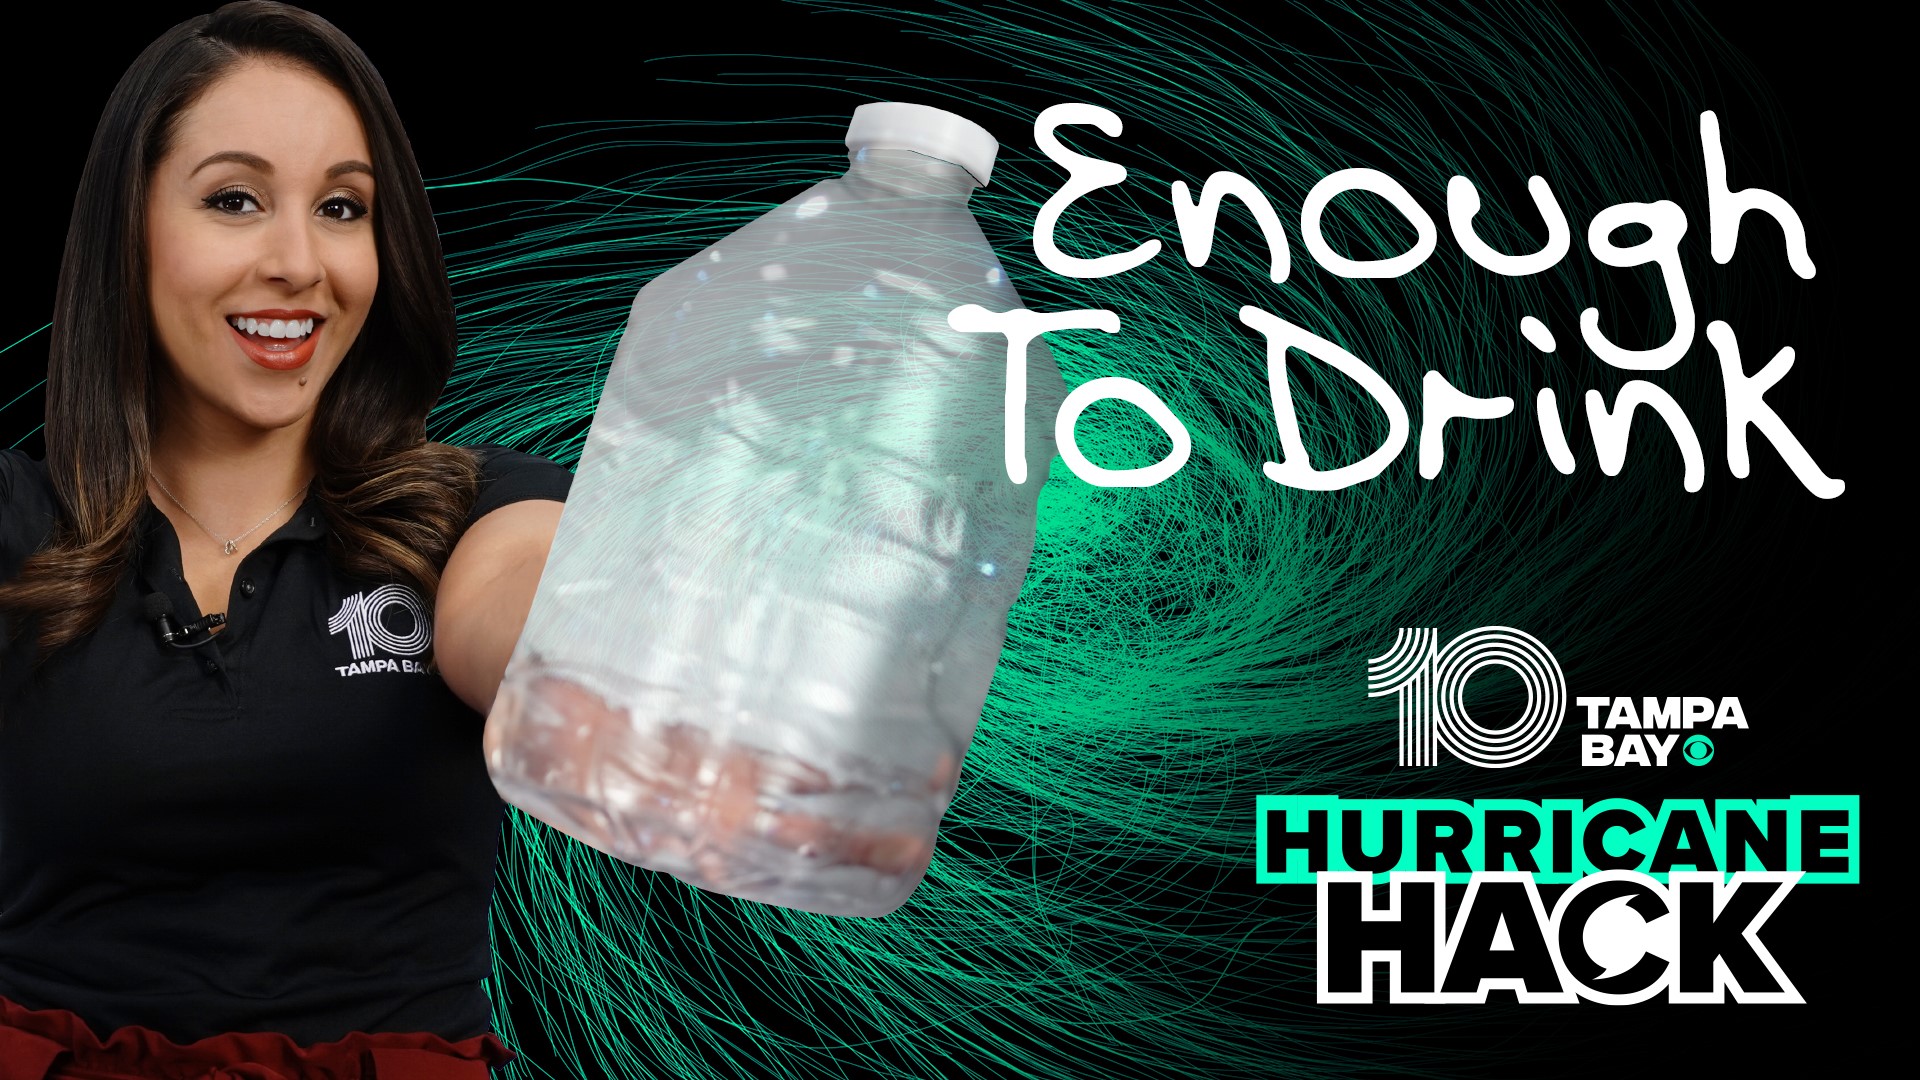 During a hurricane, 10 Tampa Bay Meteorologist Natalie Ferrari says it's good to plan for one gallon of water for seven days for each person in your home.